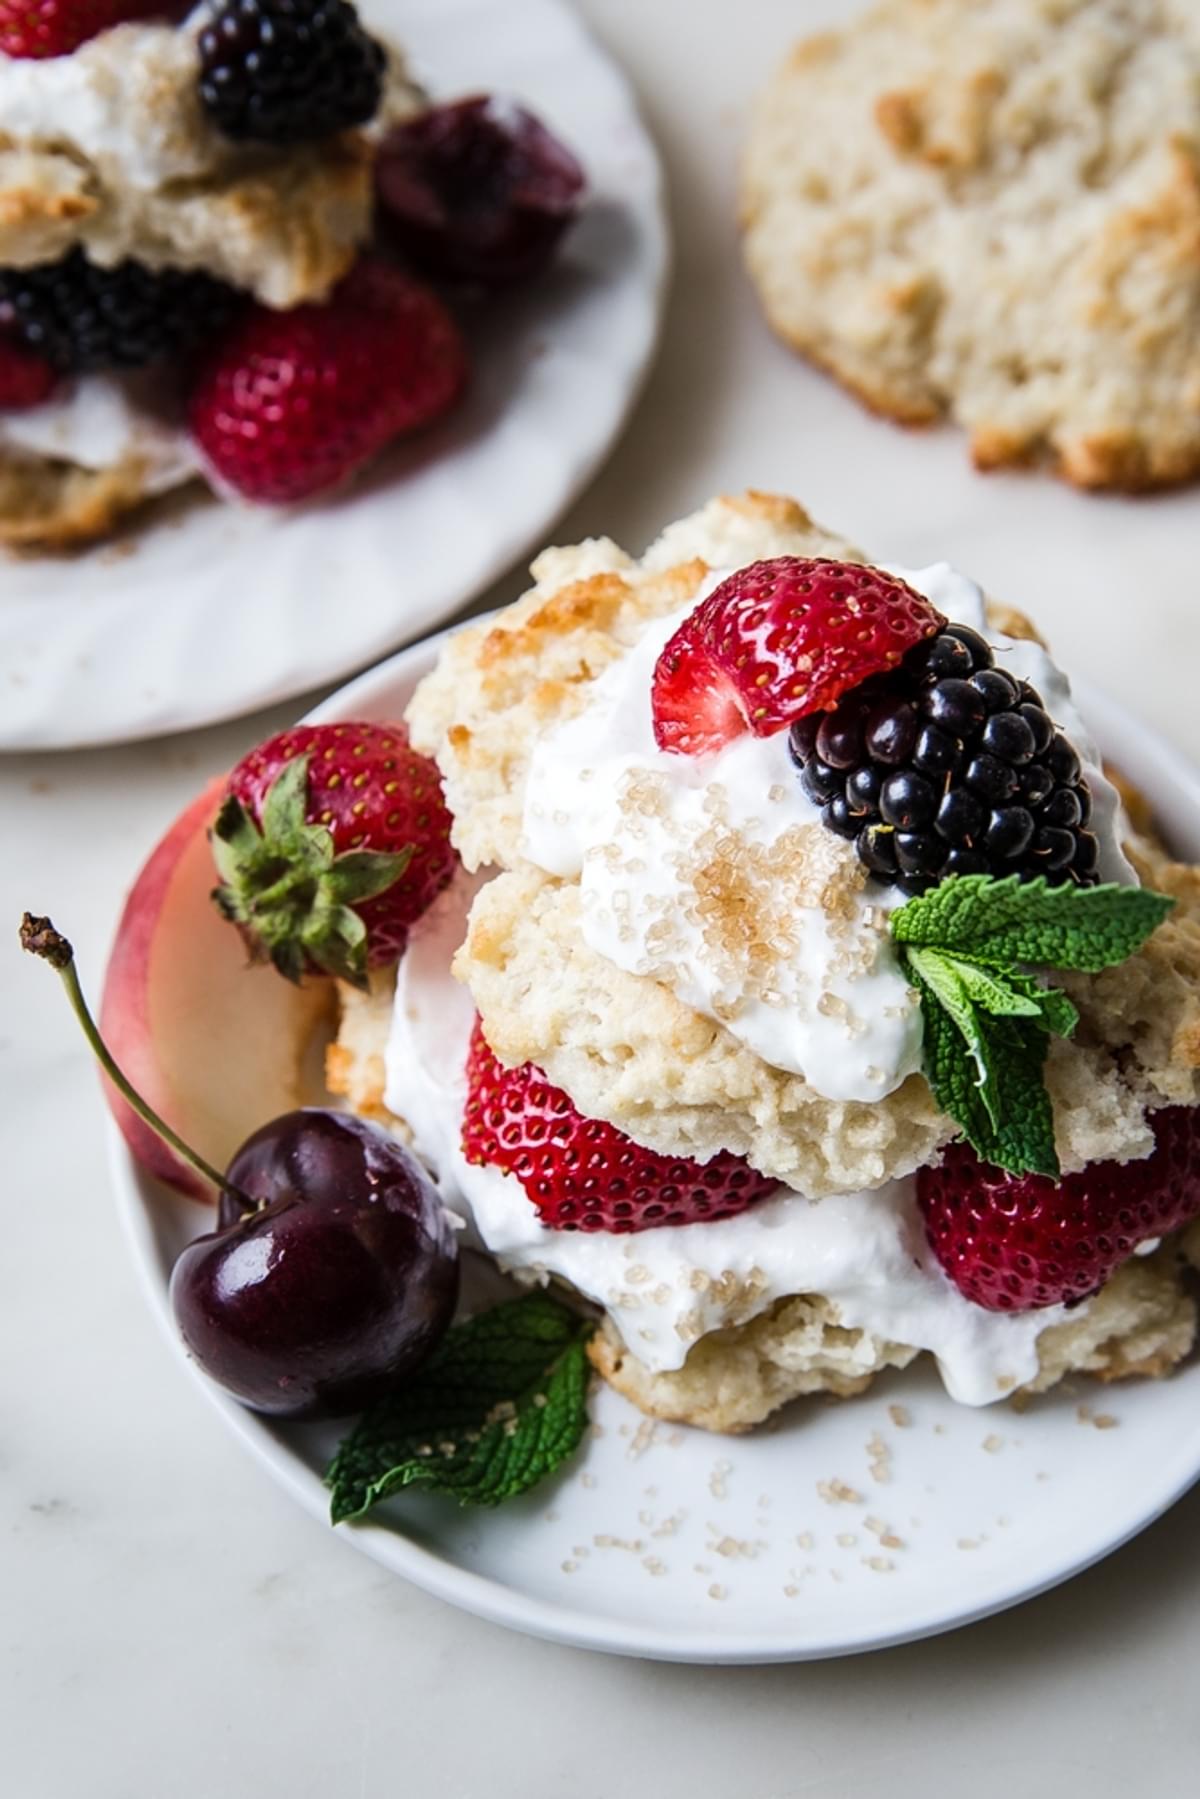 Mixed berry shortcake with whipped cream on glass plates